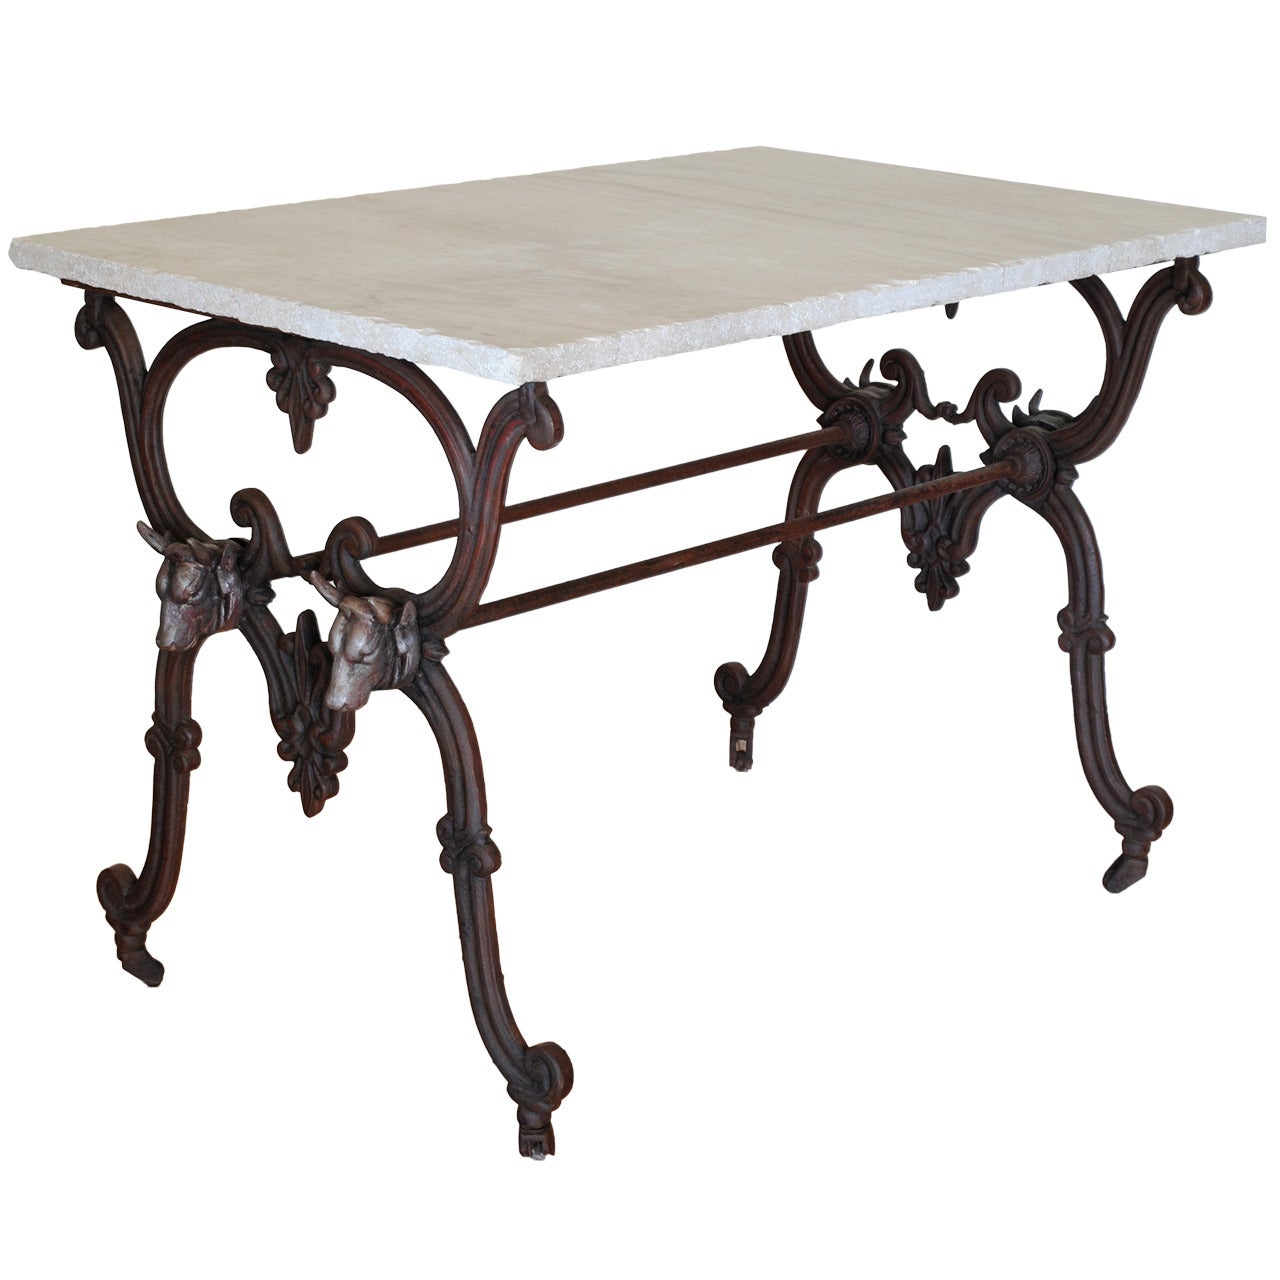 French Cast Iron Table with Daino Reale Marble Top, Last Quarter of 19th Century